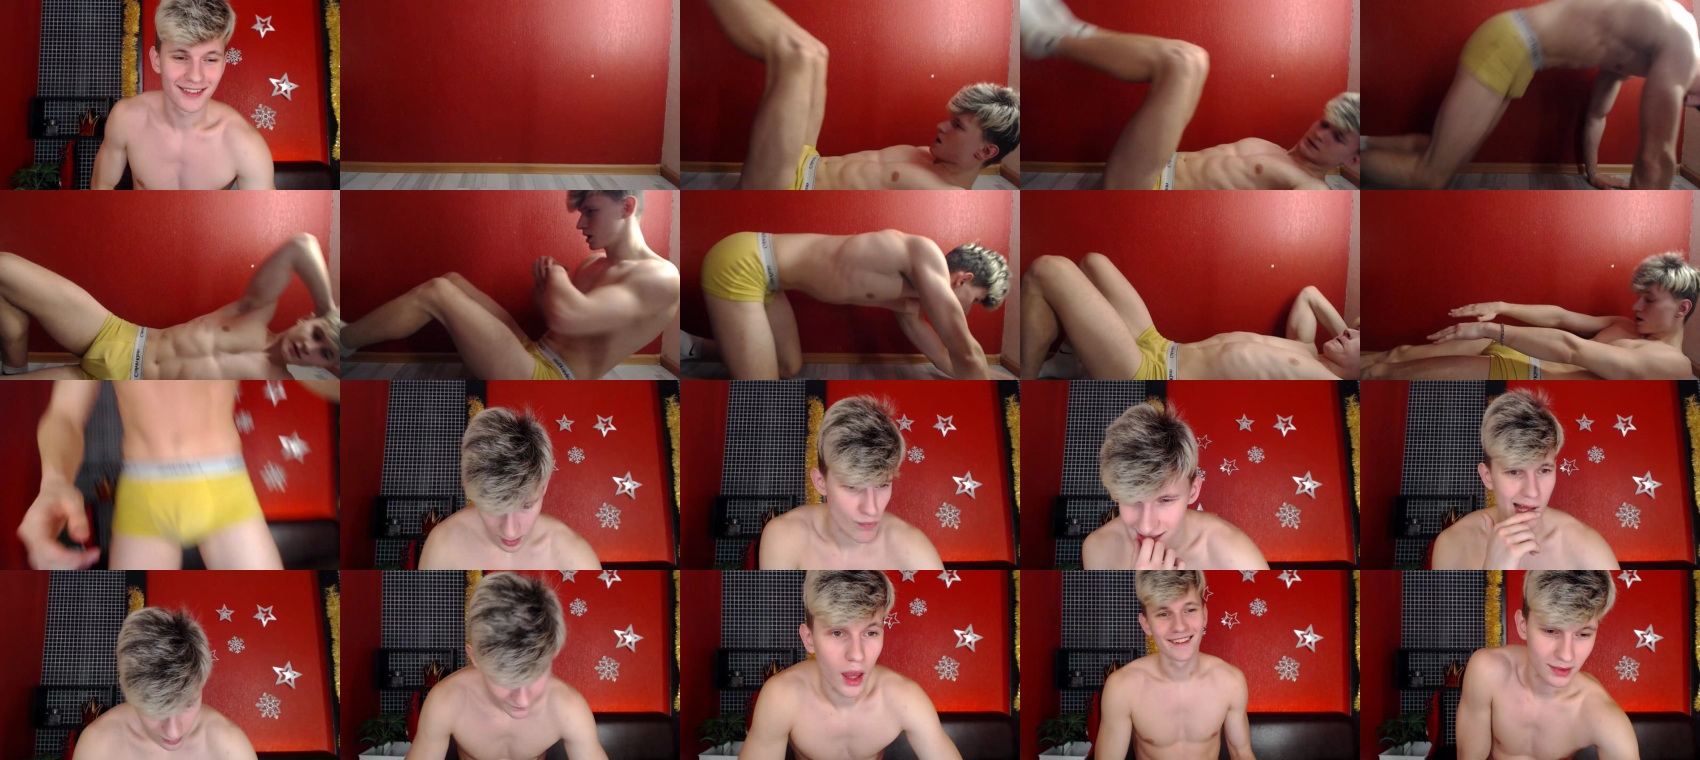 kevin_ringer cute CAM SHOW @ Chaturbate 12-01-2022